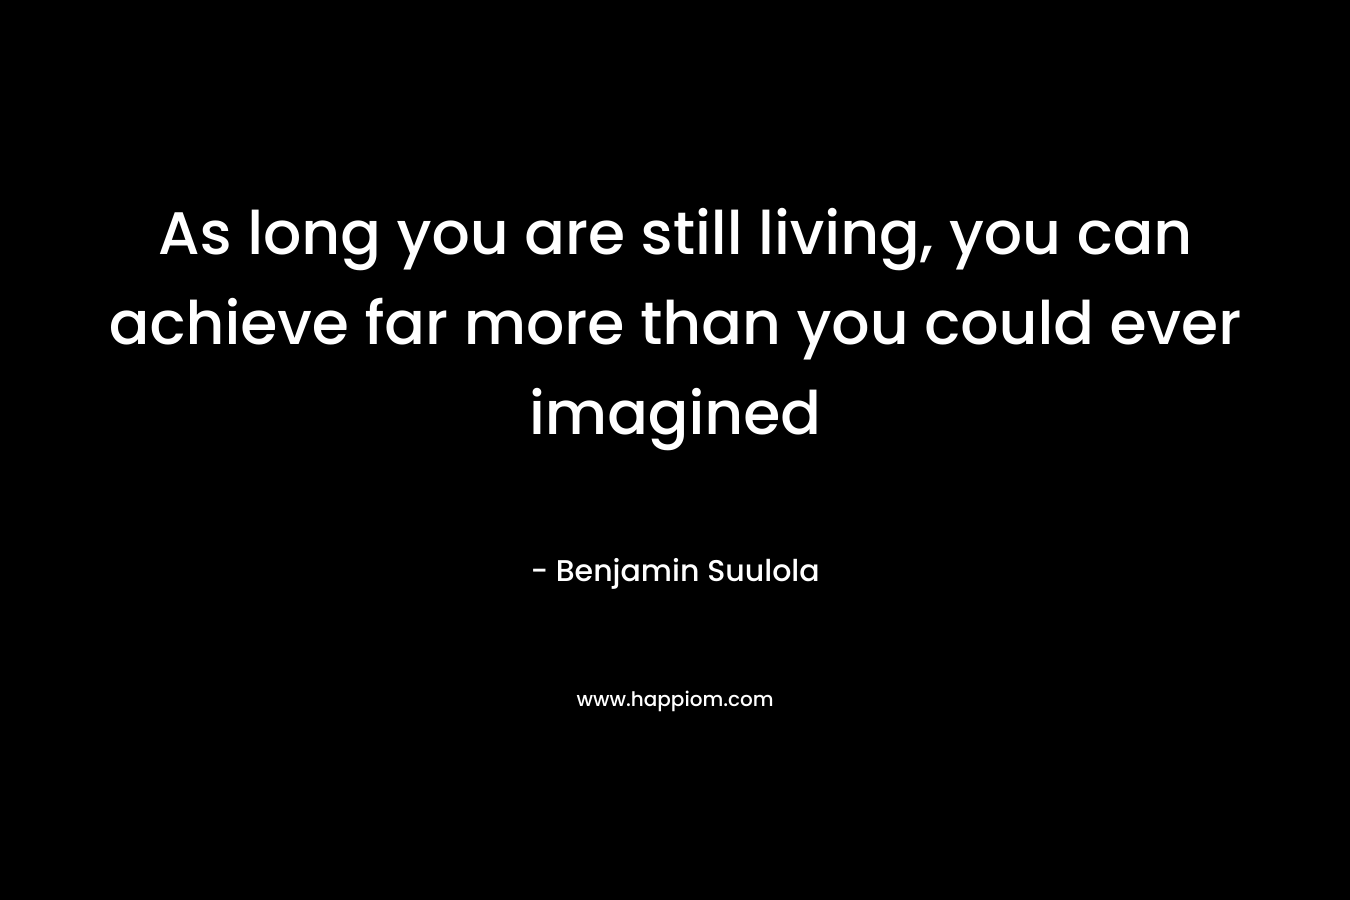 As long you are still living, you can achieve far more than you could ever imagined – Benjamin Suulola